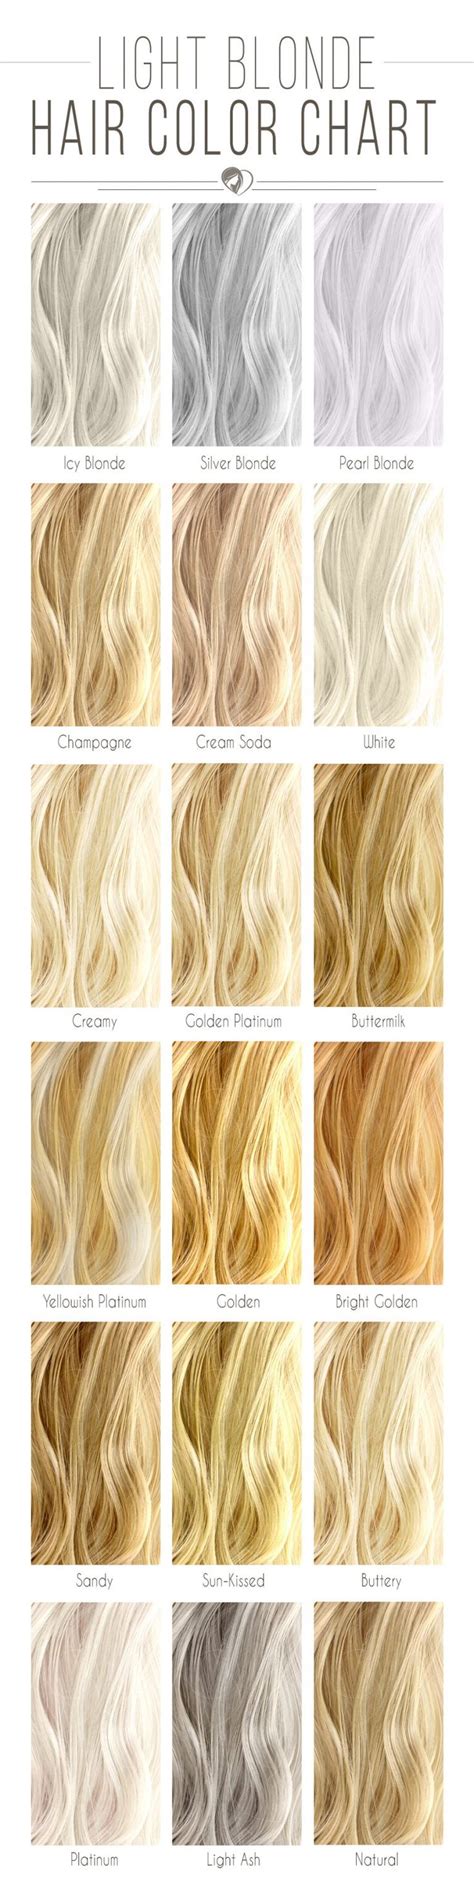 blonde hair color chart to find the right shade for you lovehairstyles blonde hair color